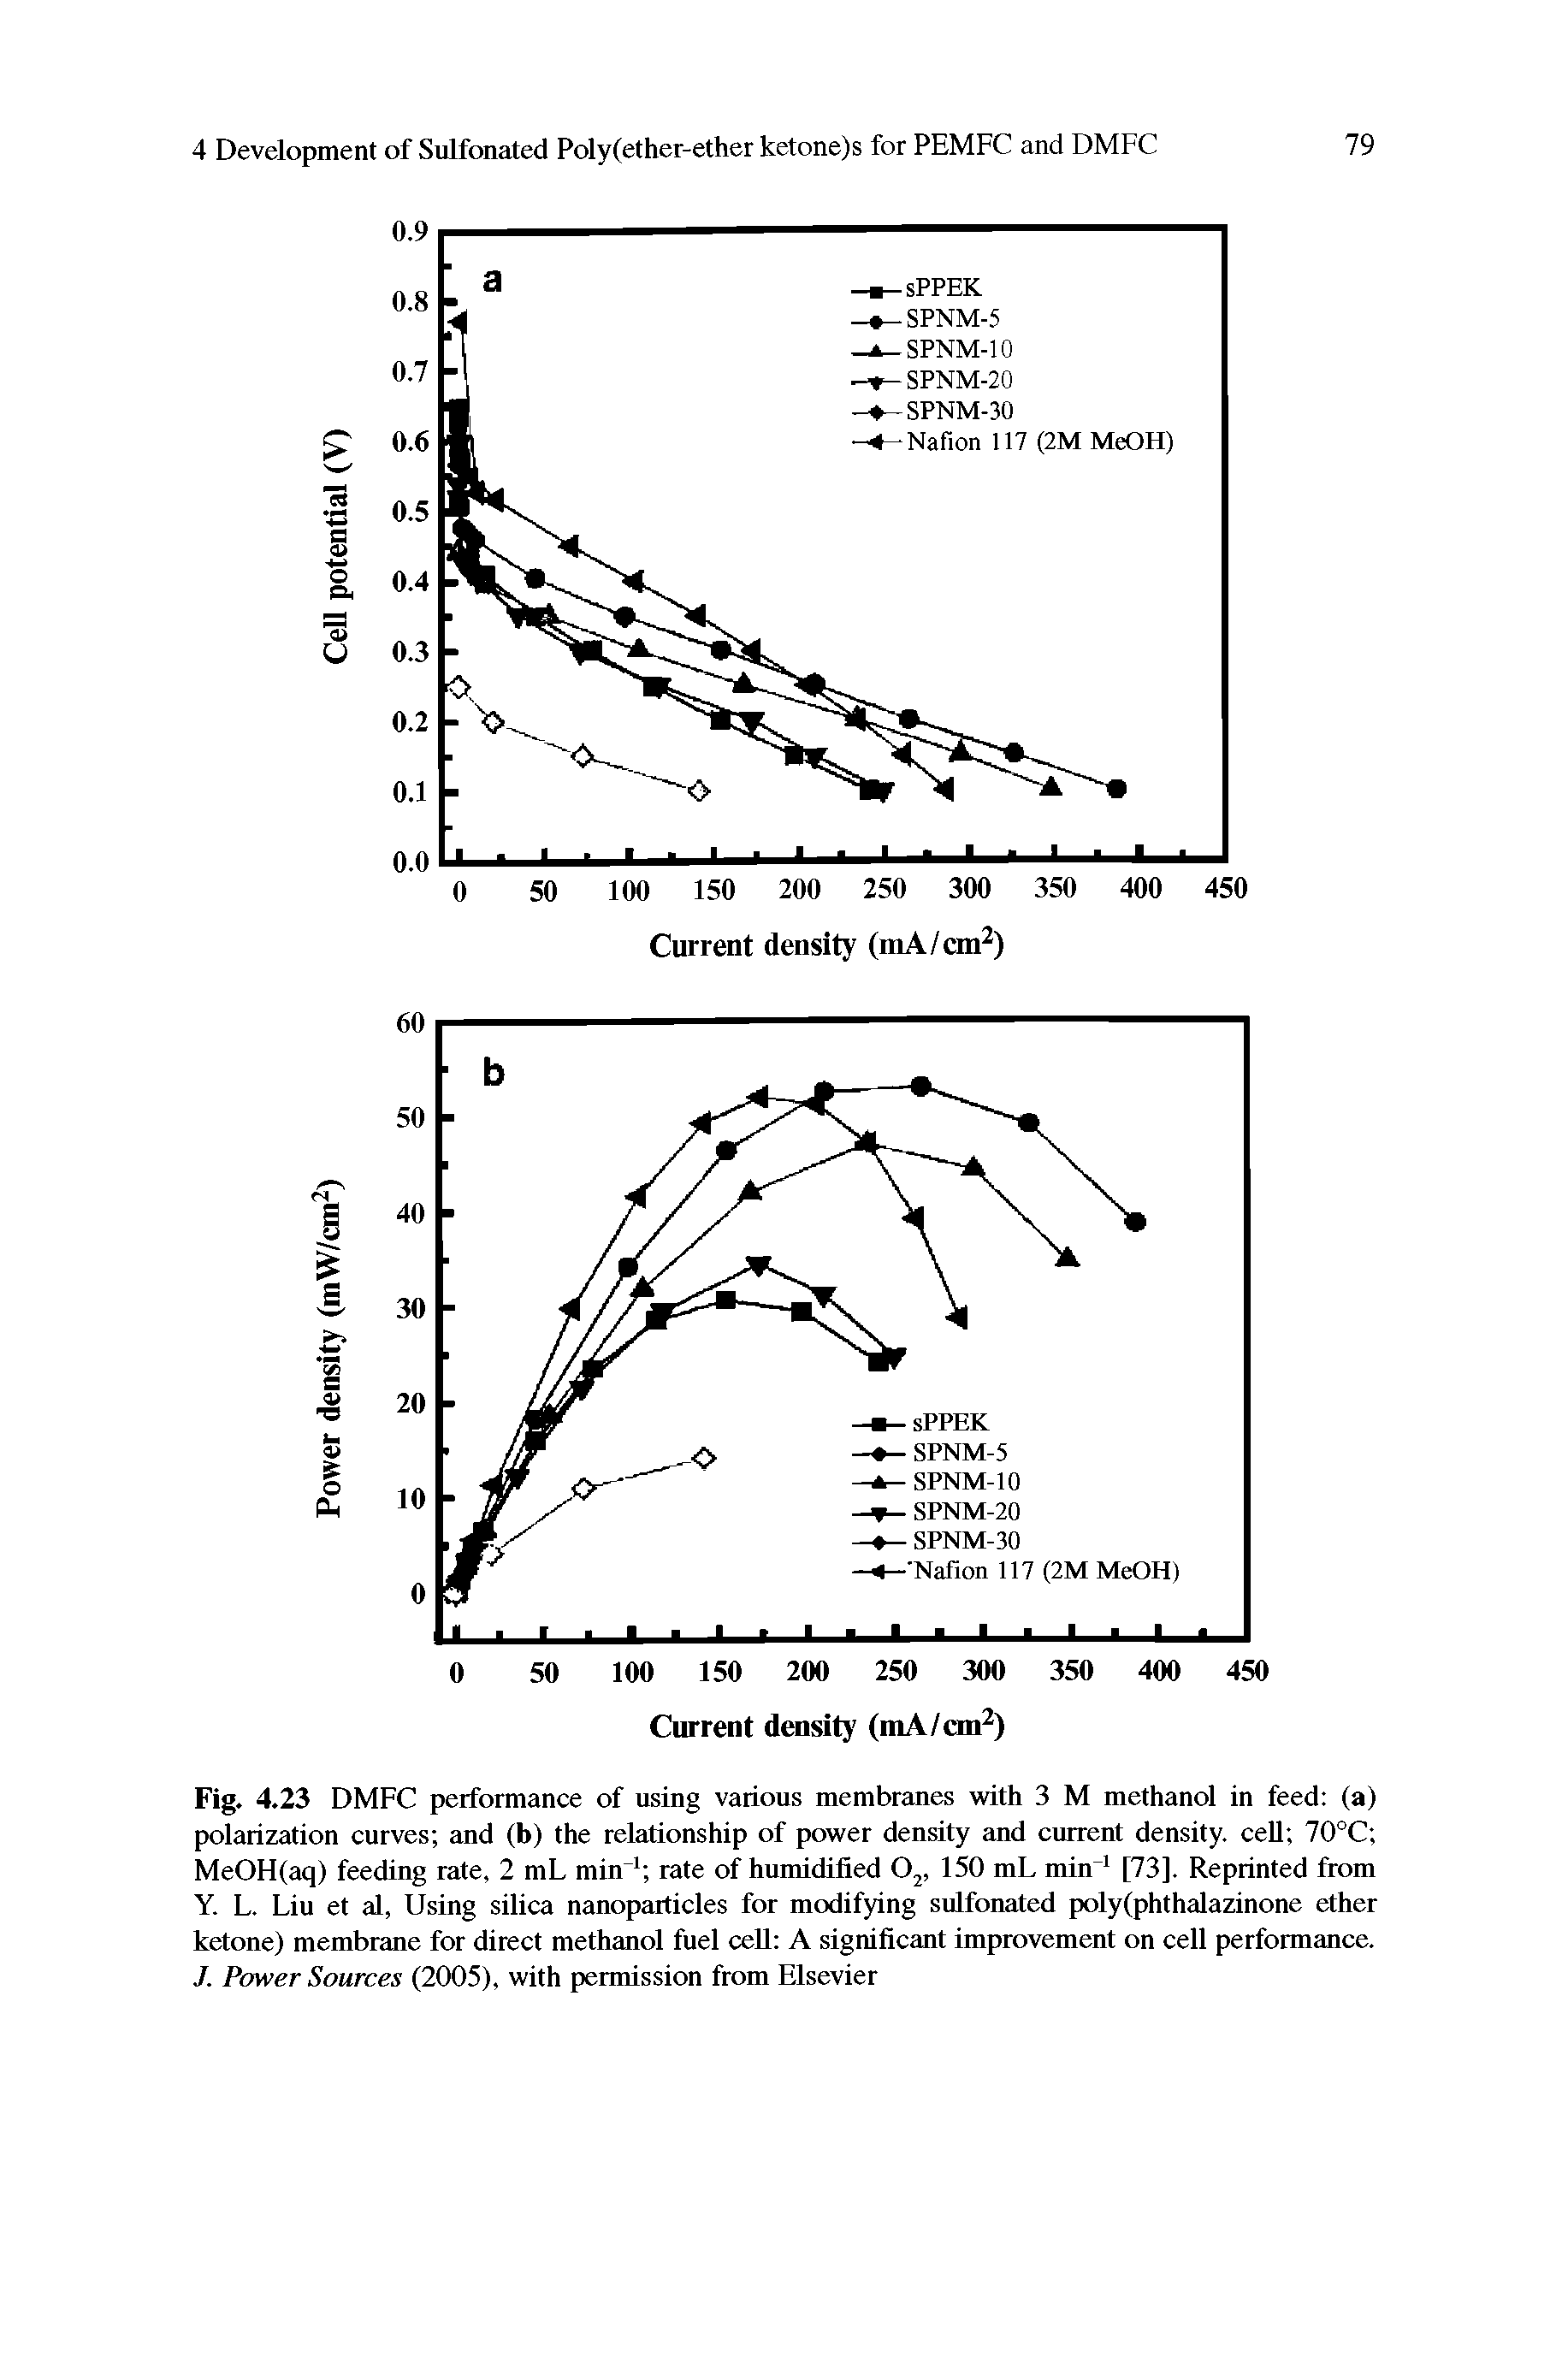 Fig. 4.23 DMFC performance of using various membranes with 3 M methanol in feed (a) polarization curves and (b) the relationship of power density and current density, cell 70°C MeOH(aq) feeding rate, 2 mL min rate of humidified O, 150 mL min" [73]. Reprinted from Y. L. Liu et al, Using silica nanopaiticles for modifying sulfonated poly(phthalazinone ether ketone) membrane for direct methanol fuel cell A significant improvement on cell performance. J. Power Sources (2005), with permission from Elsevier...